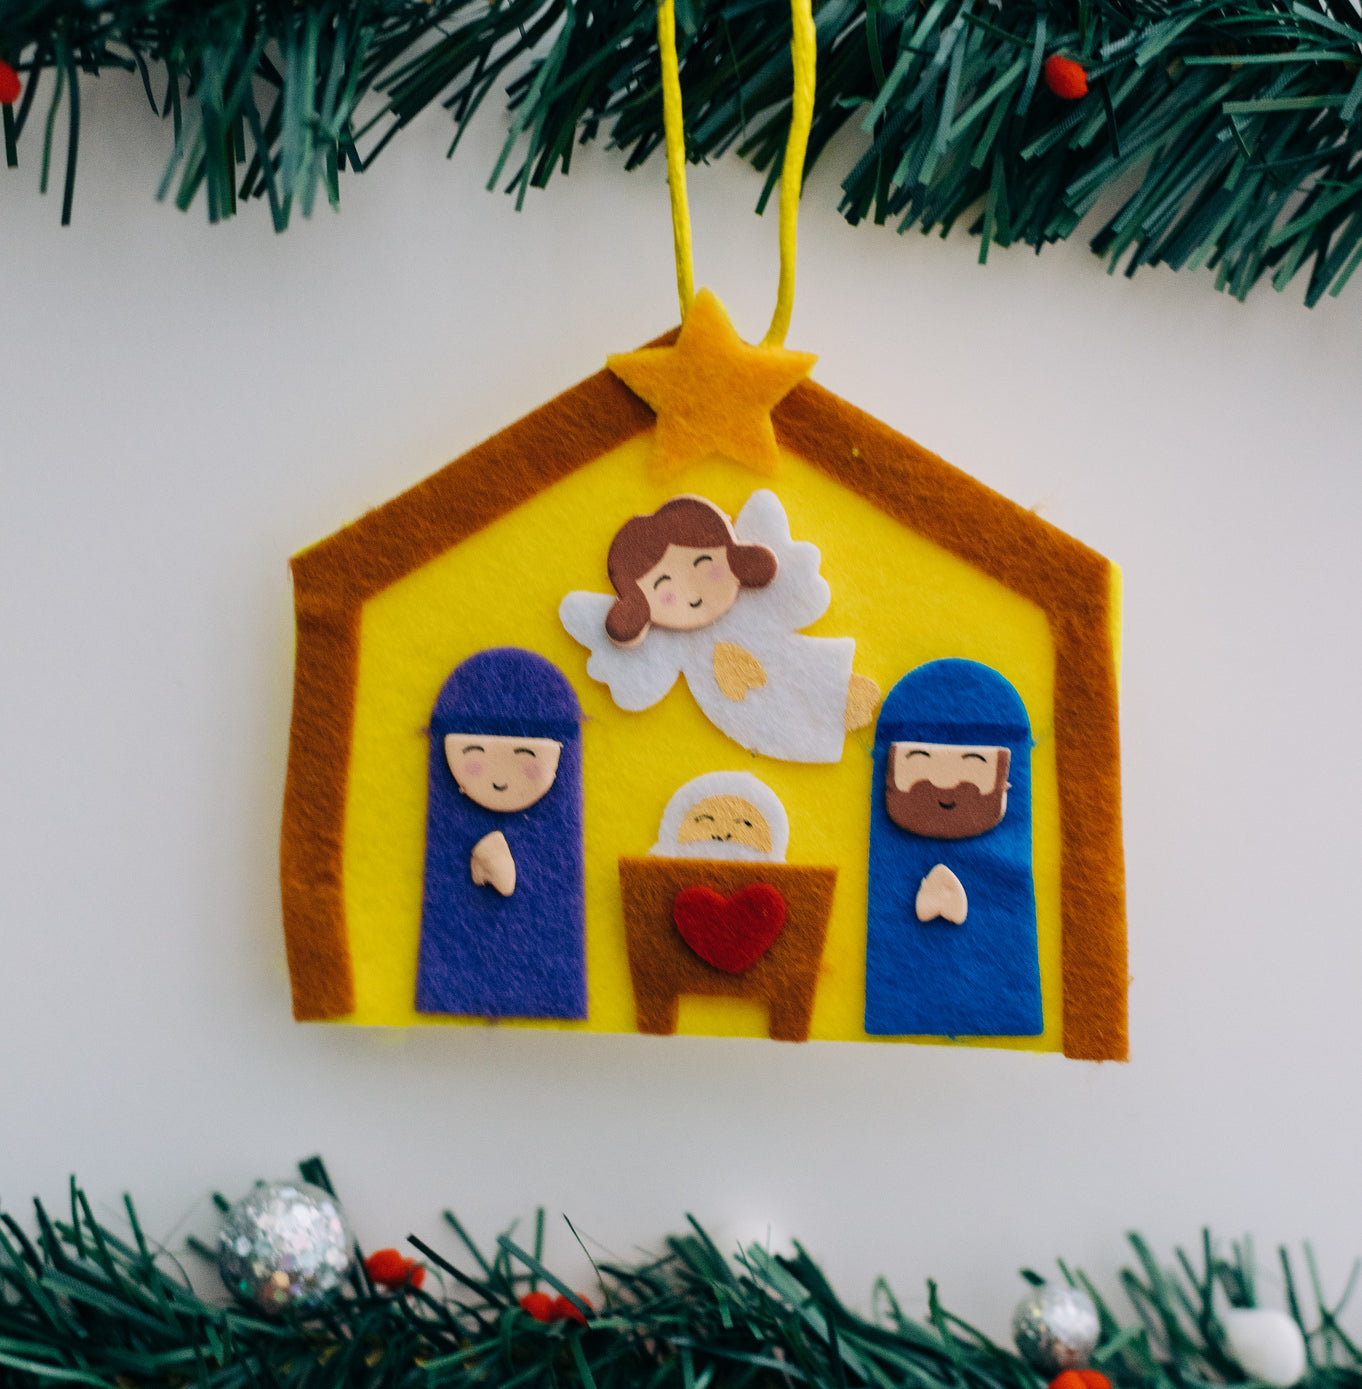 Four Ways for Your Family to Practice Hope this Christmas